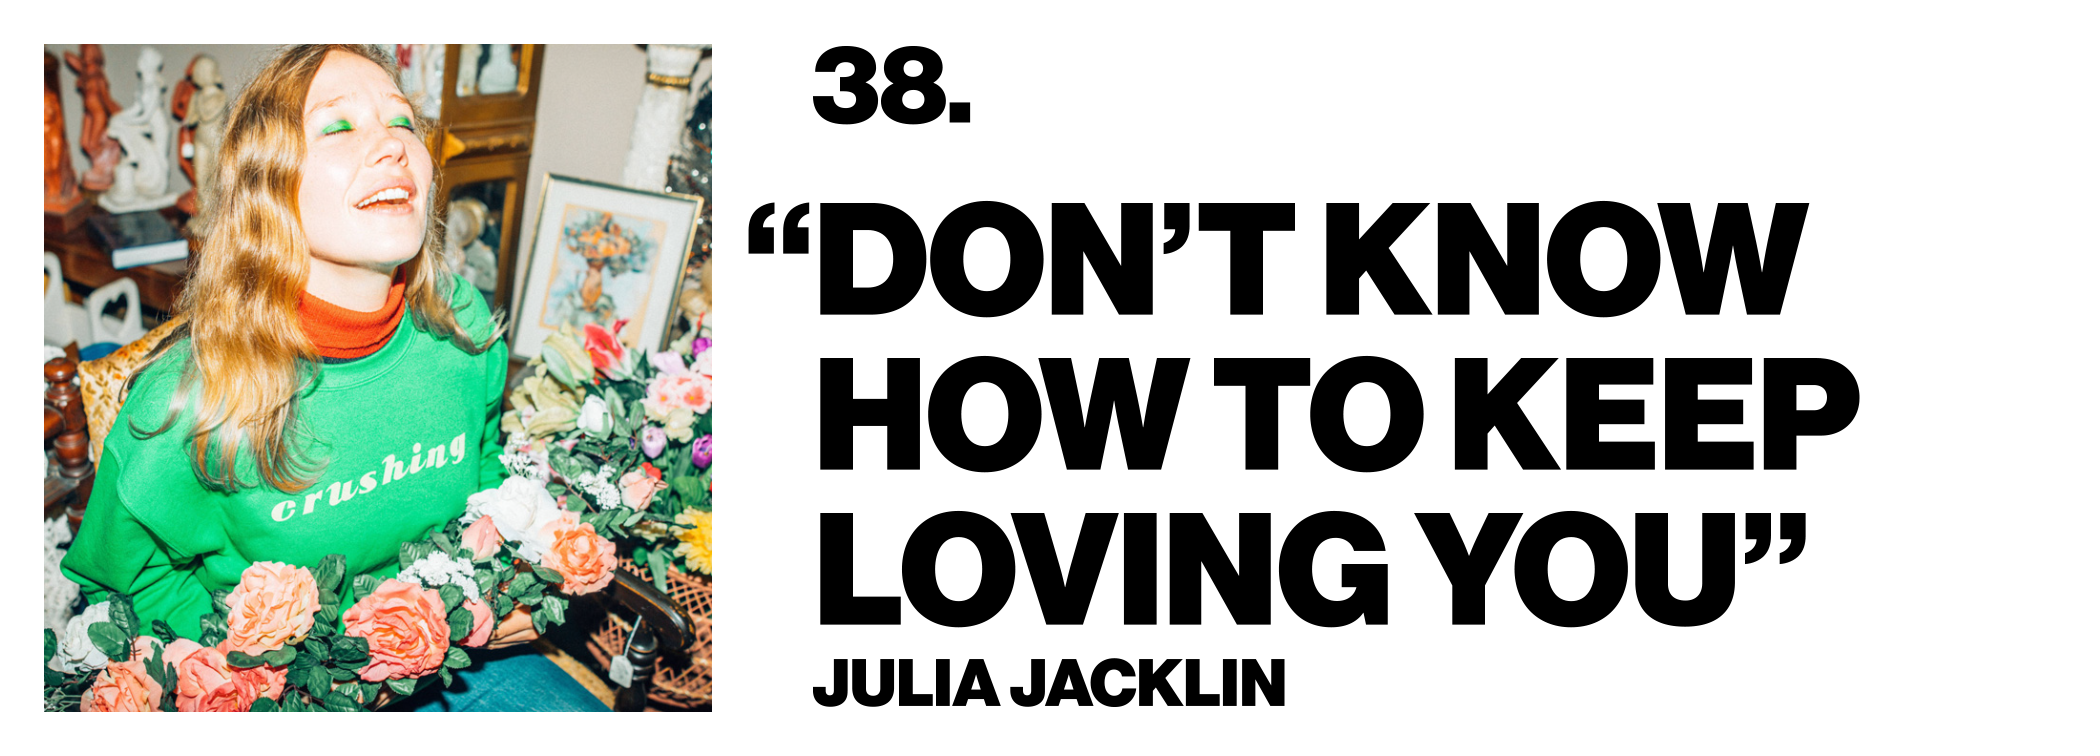 1576522591412-38-Julia-Jacklin-_Don_t-Know-How-to-Keep-Loving-You_